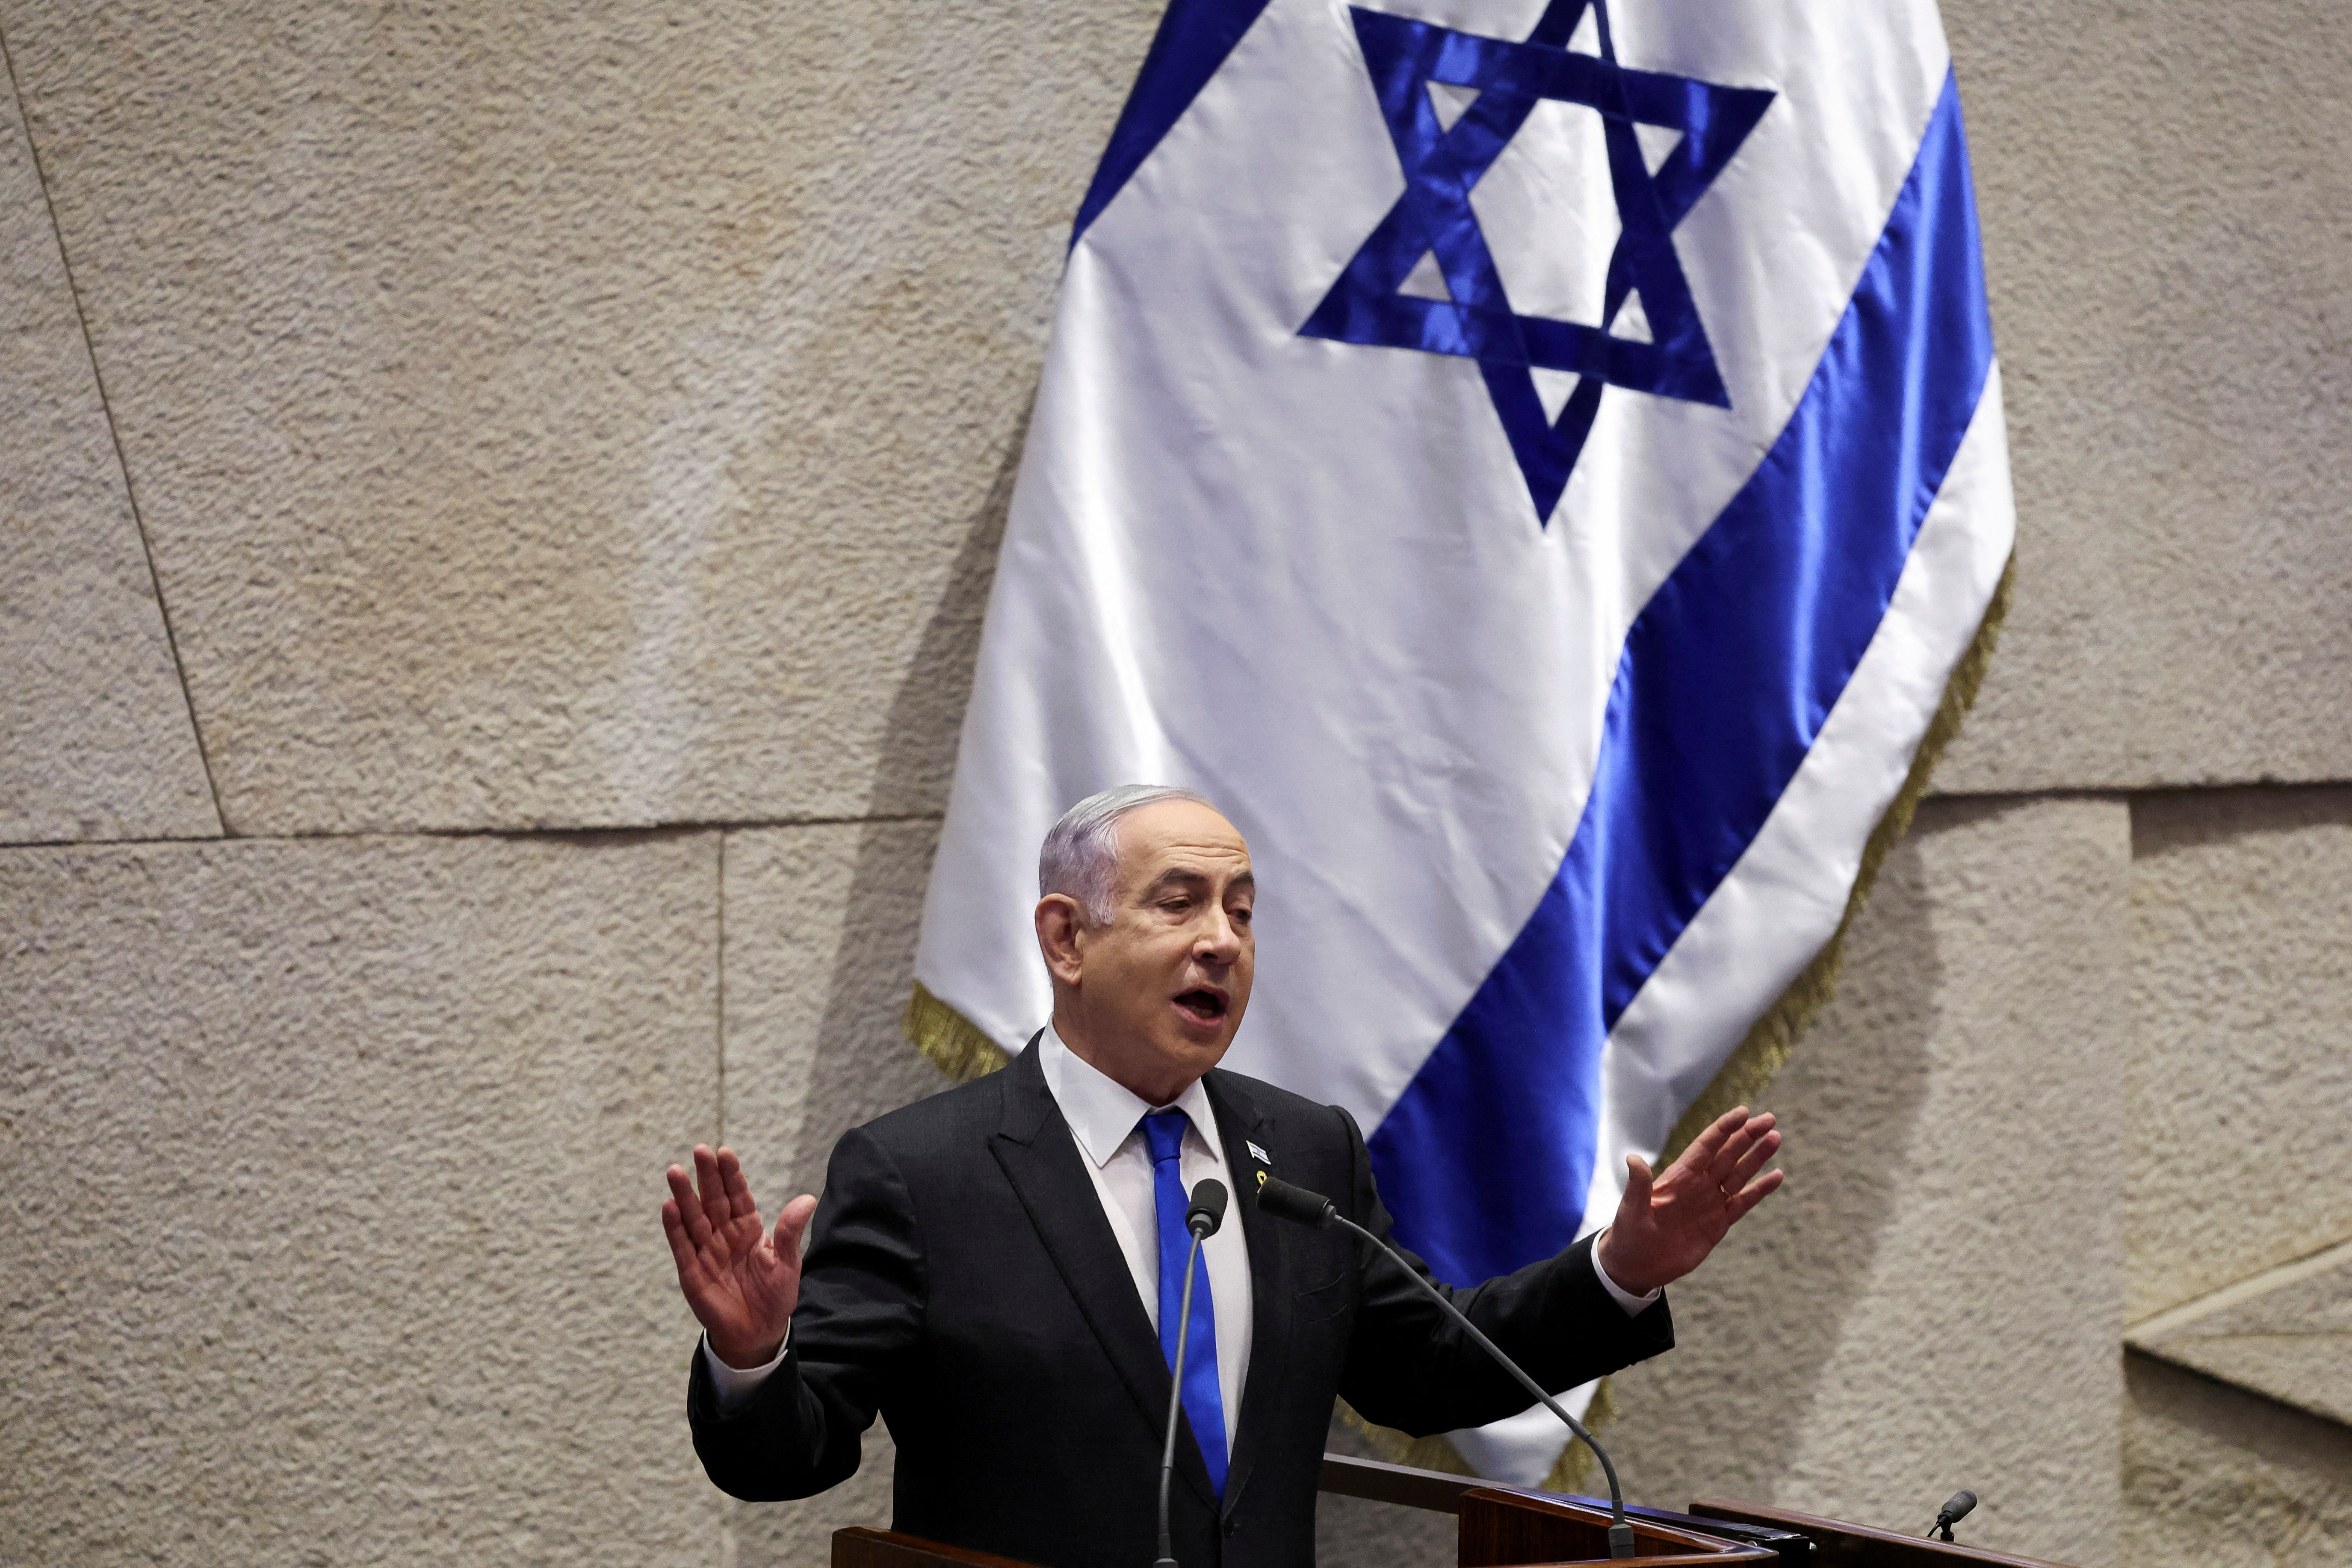 Israeli PM Netanyahu attends a discussion at the Israeli Parliament Knesset in Jerusalem